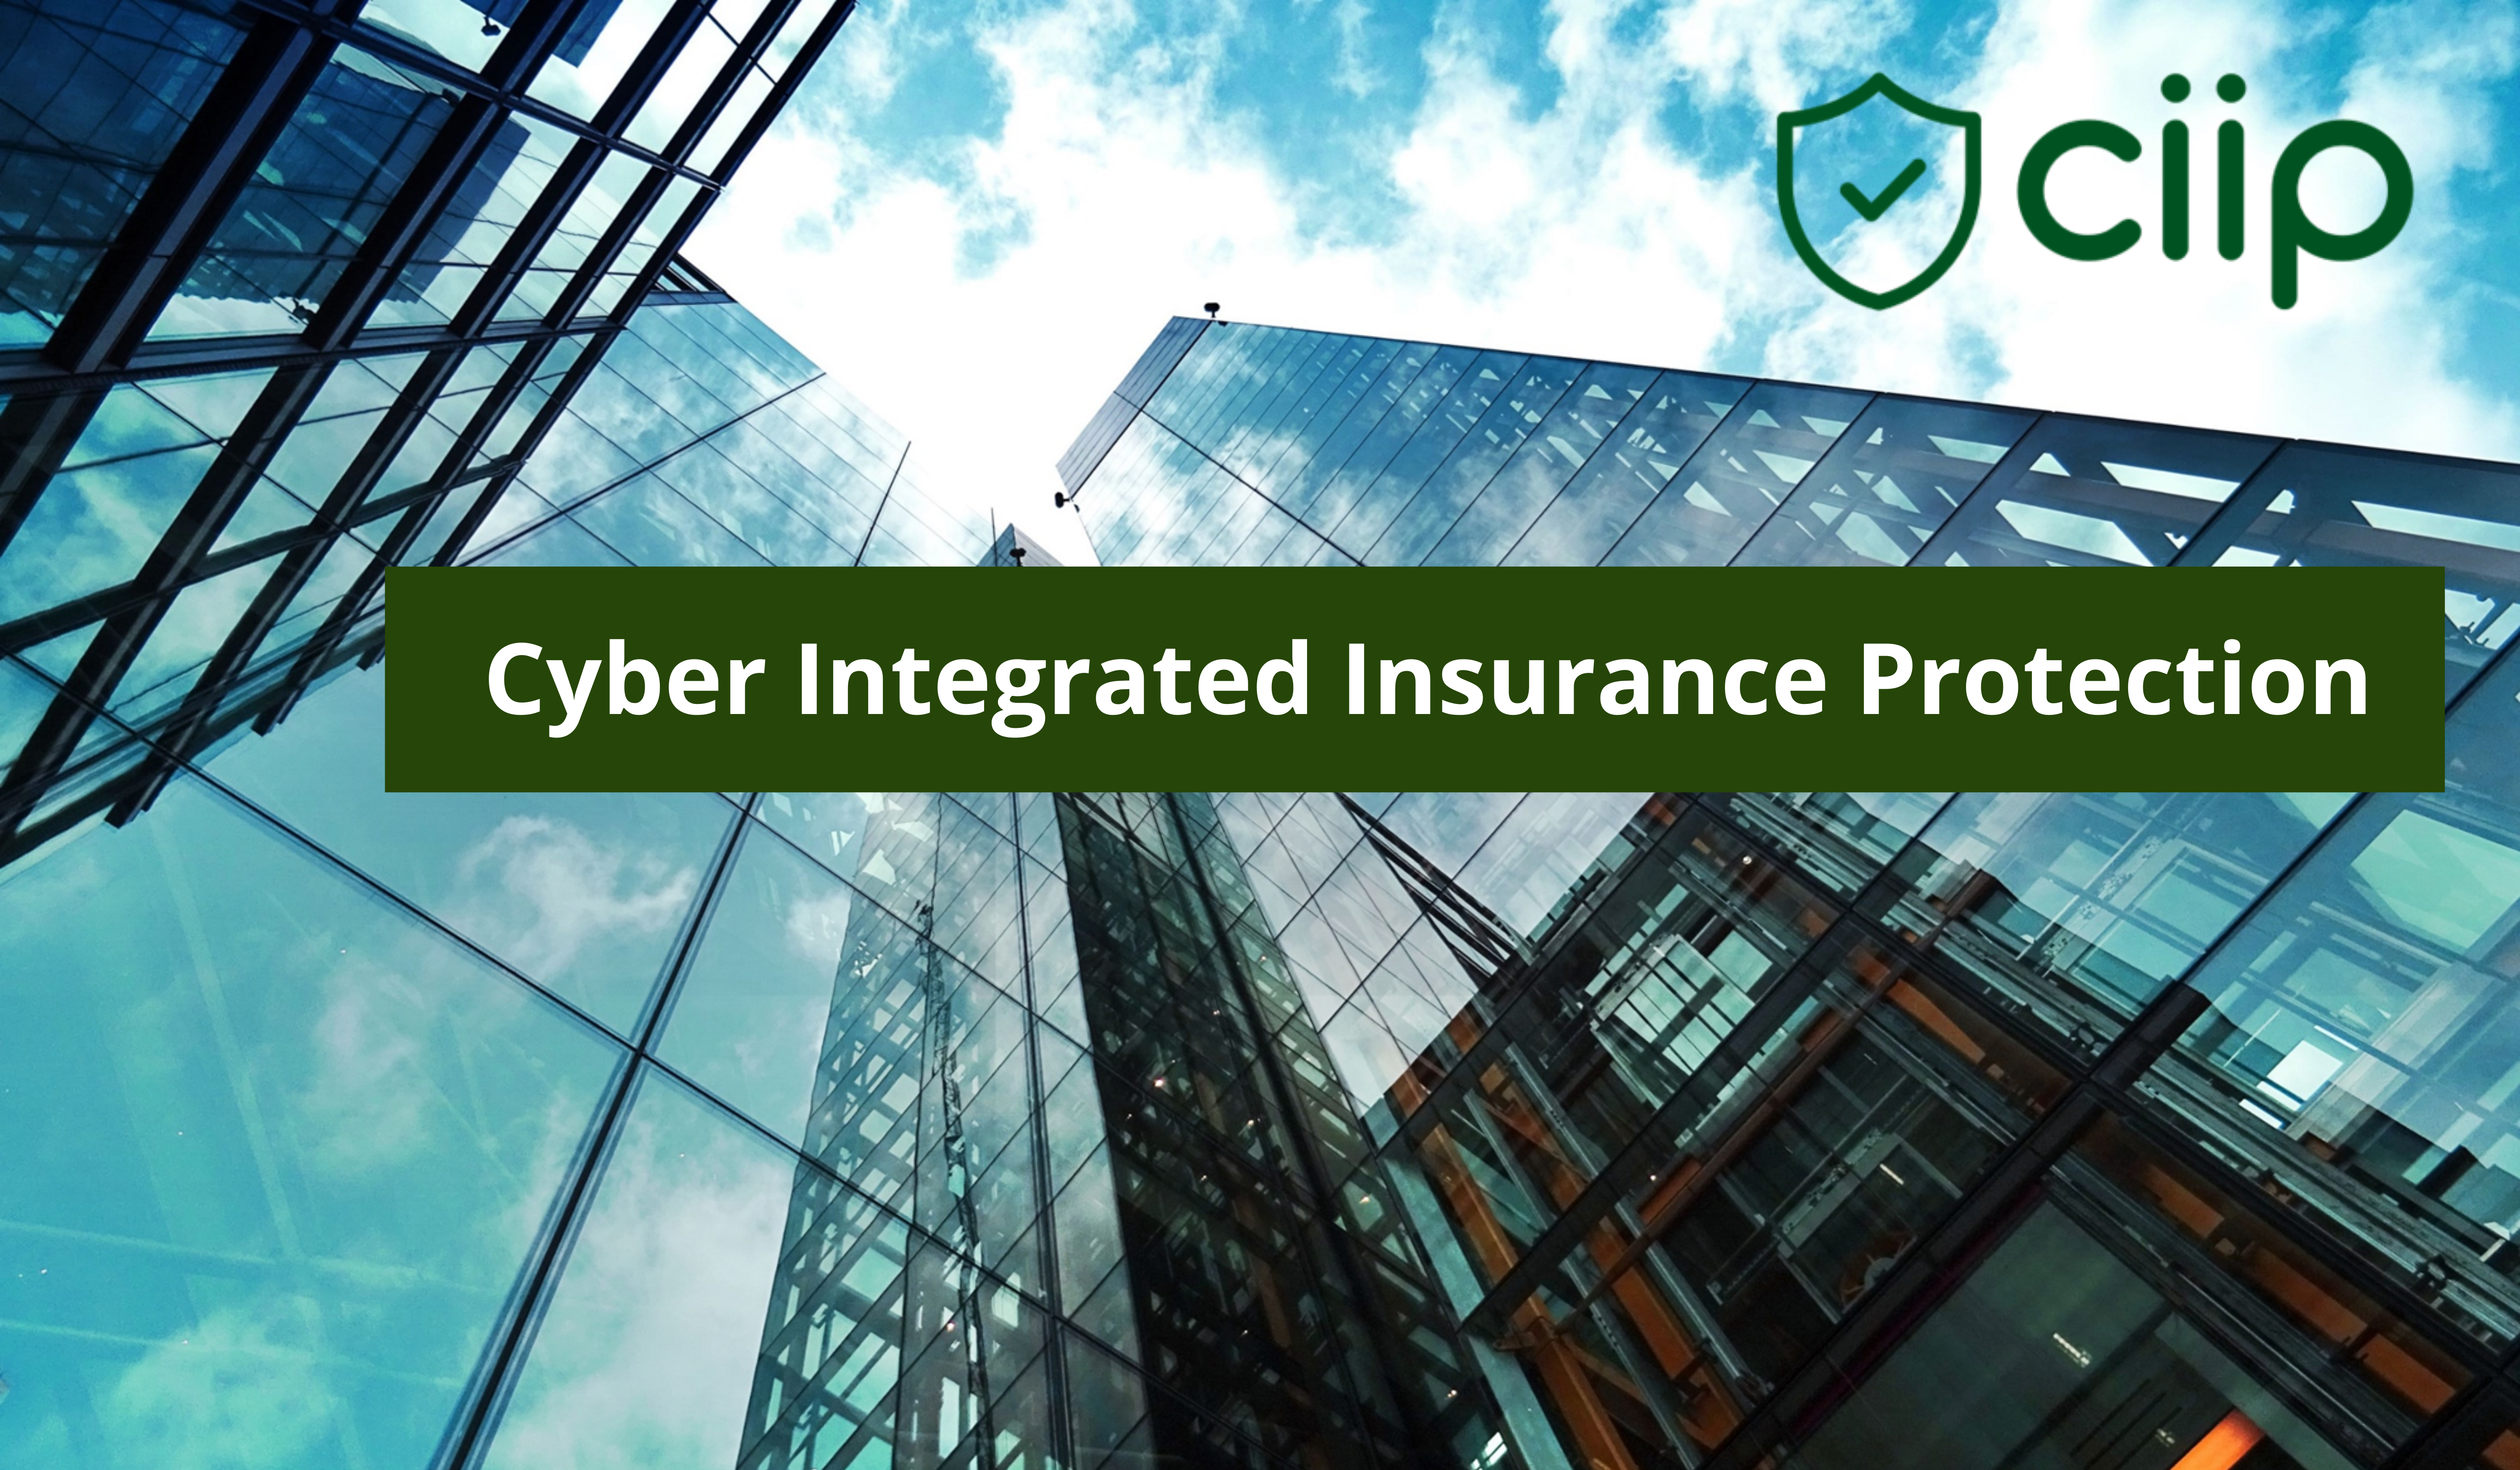 ciip cyber integrated insurance protection